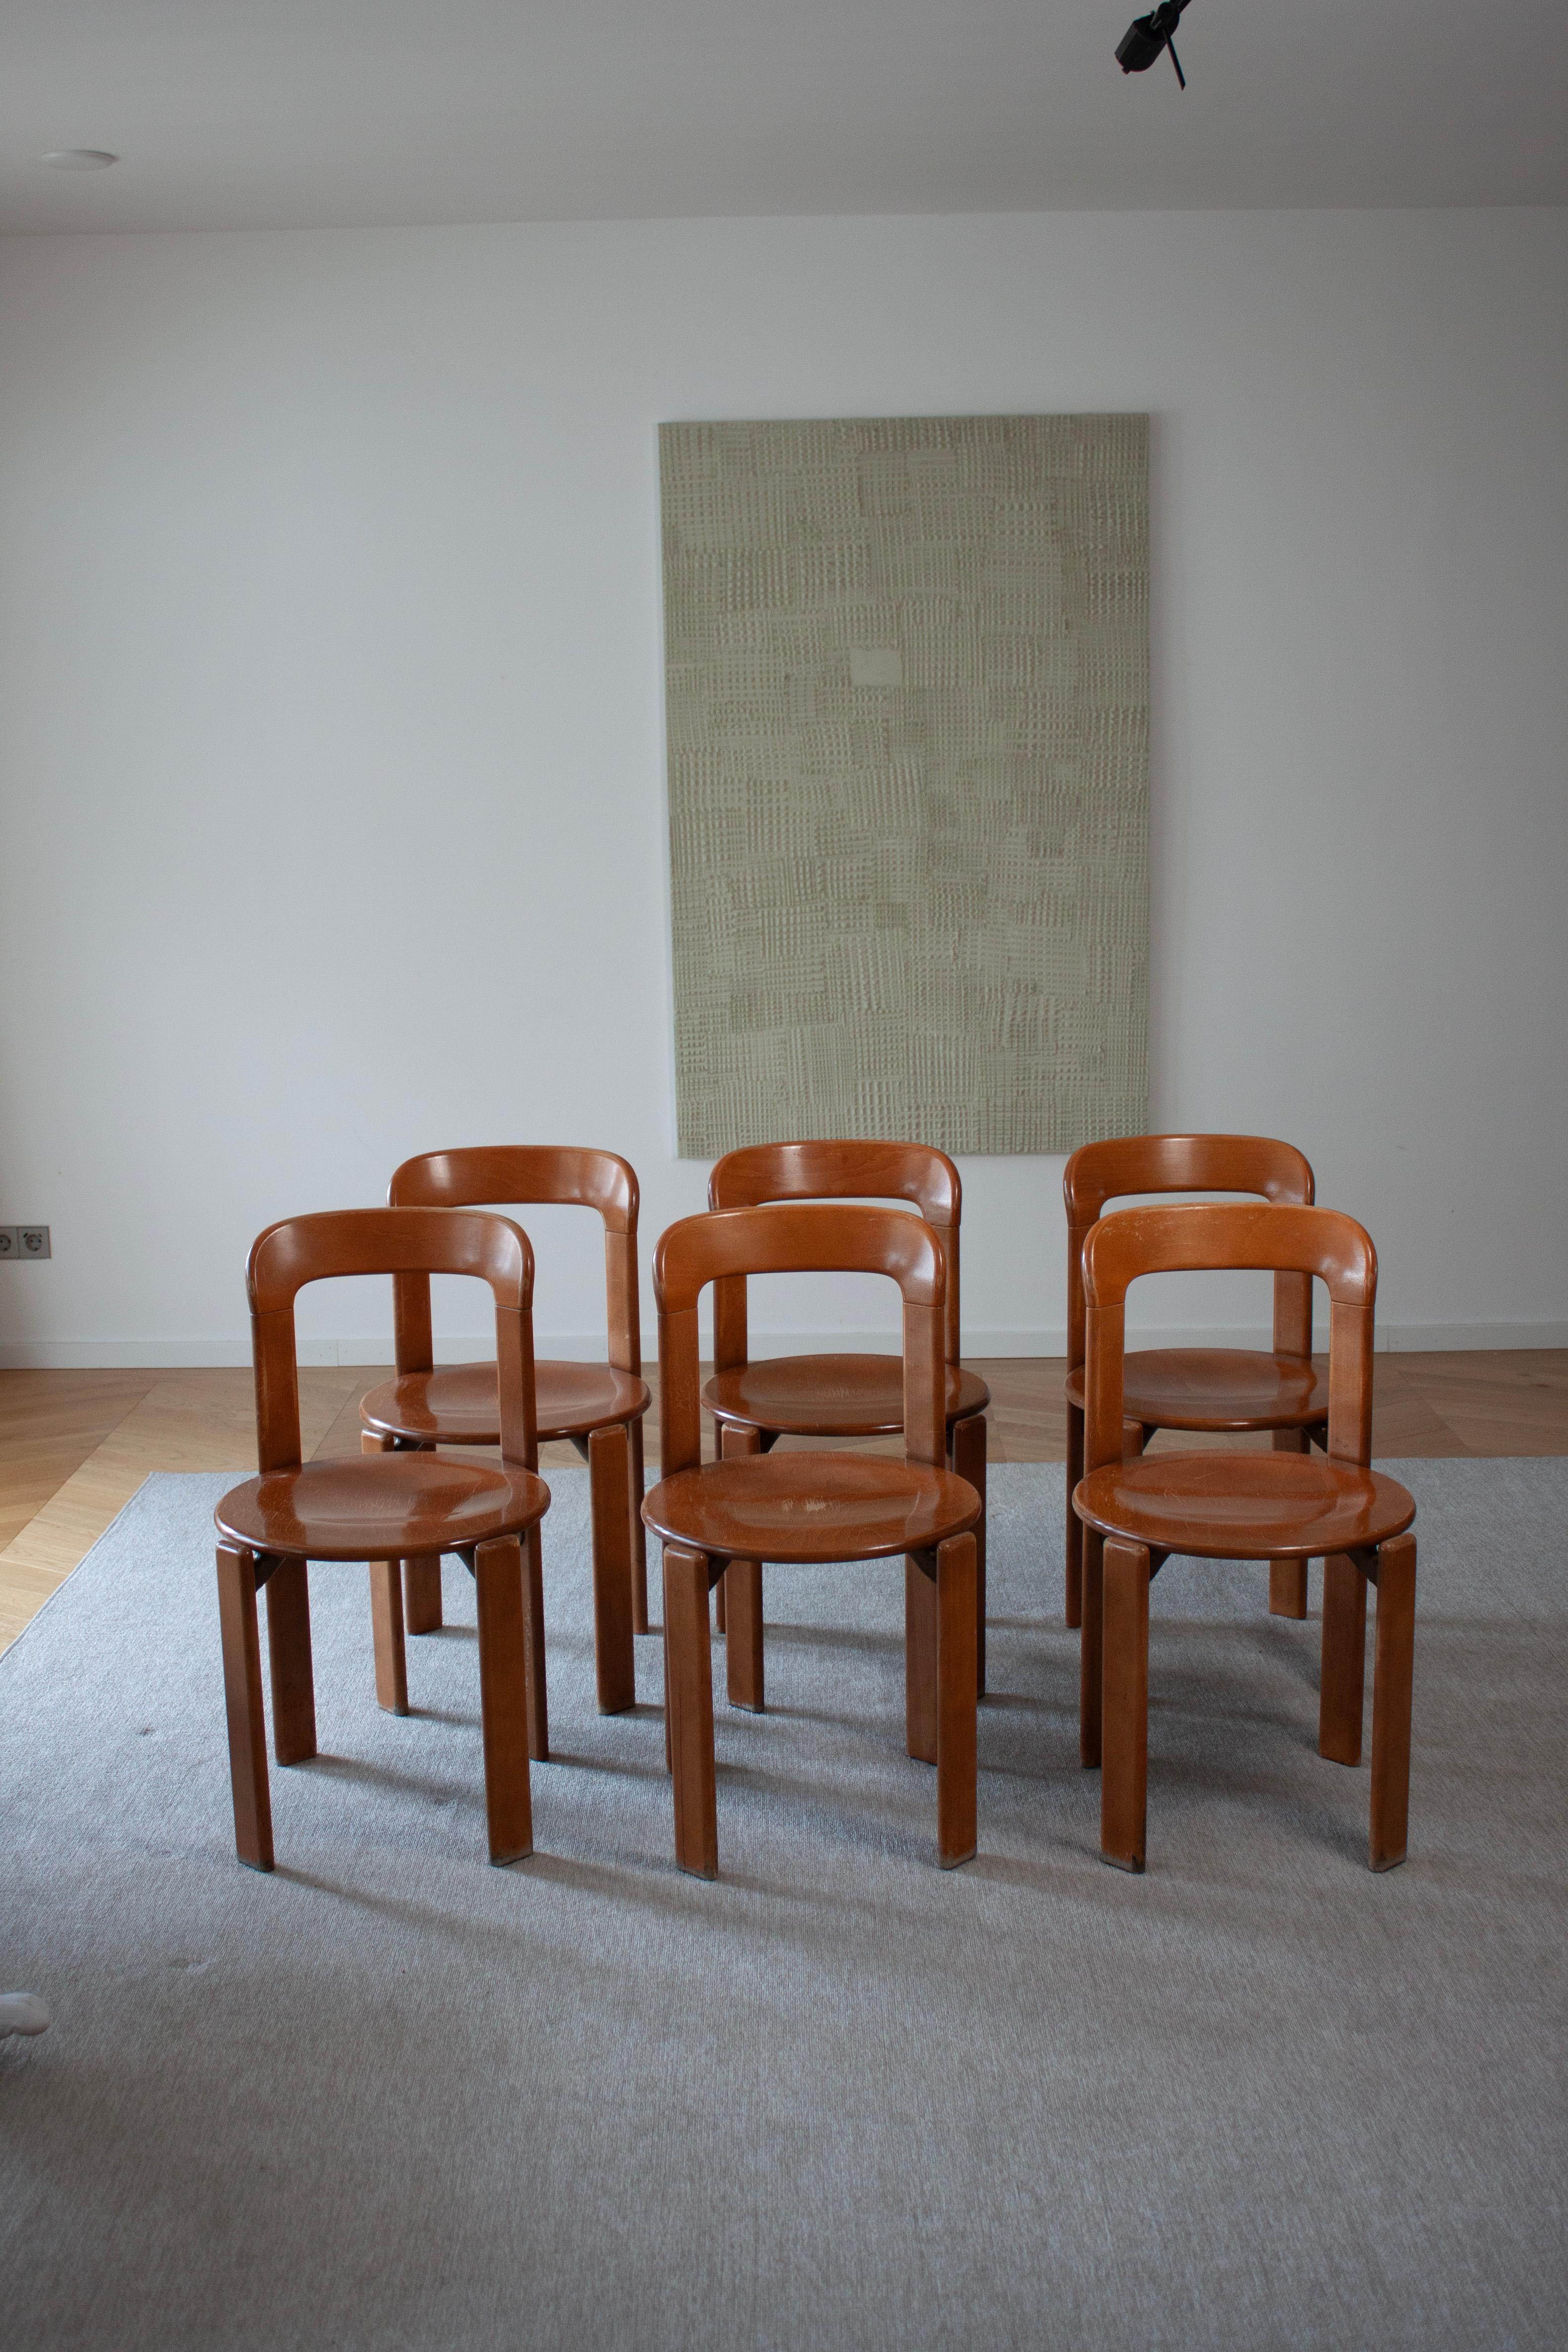 Available are 6 original Bruno Rey chairs. Made by Dietiker in Stein am Rhein, Switzerland. 

These Swiss design classics have been a staple of Swiss interiors since 1971.
Its minimal, rounded, and timeless shape has never gone out of style. The Rey